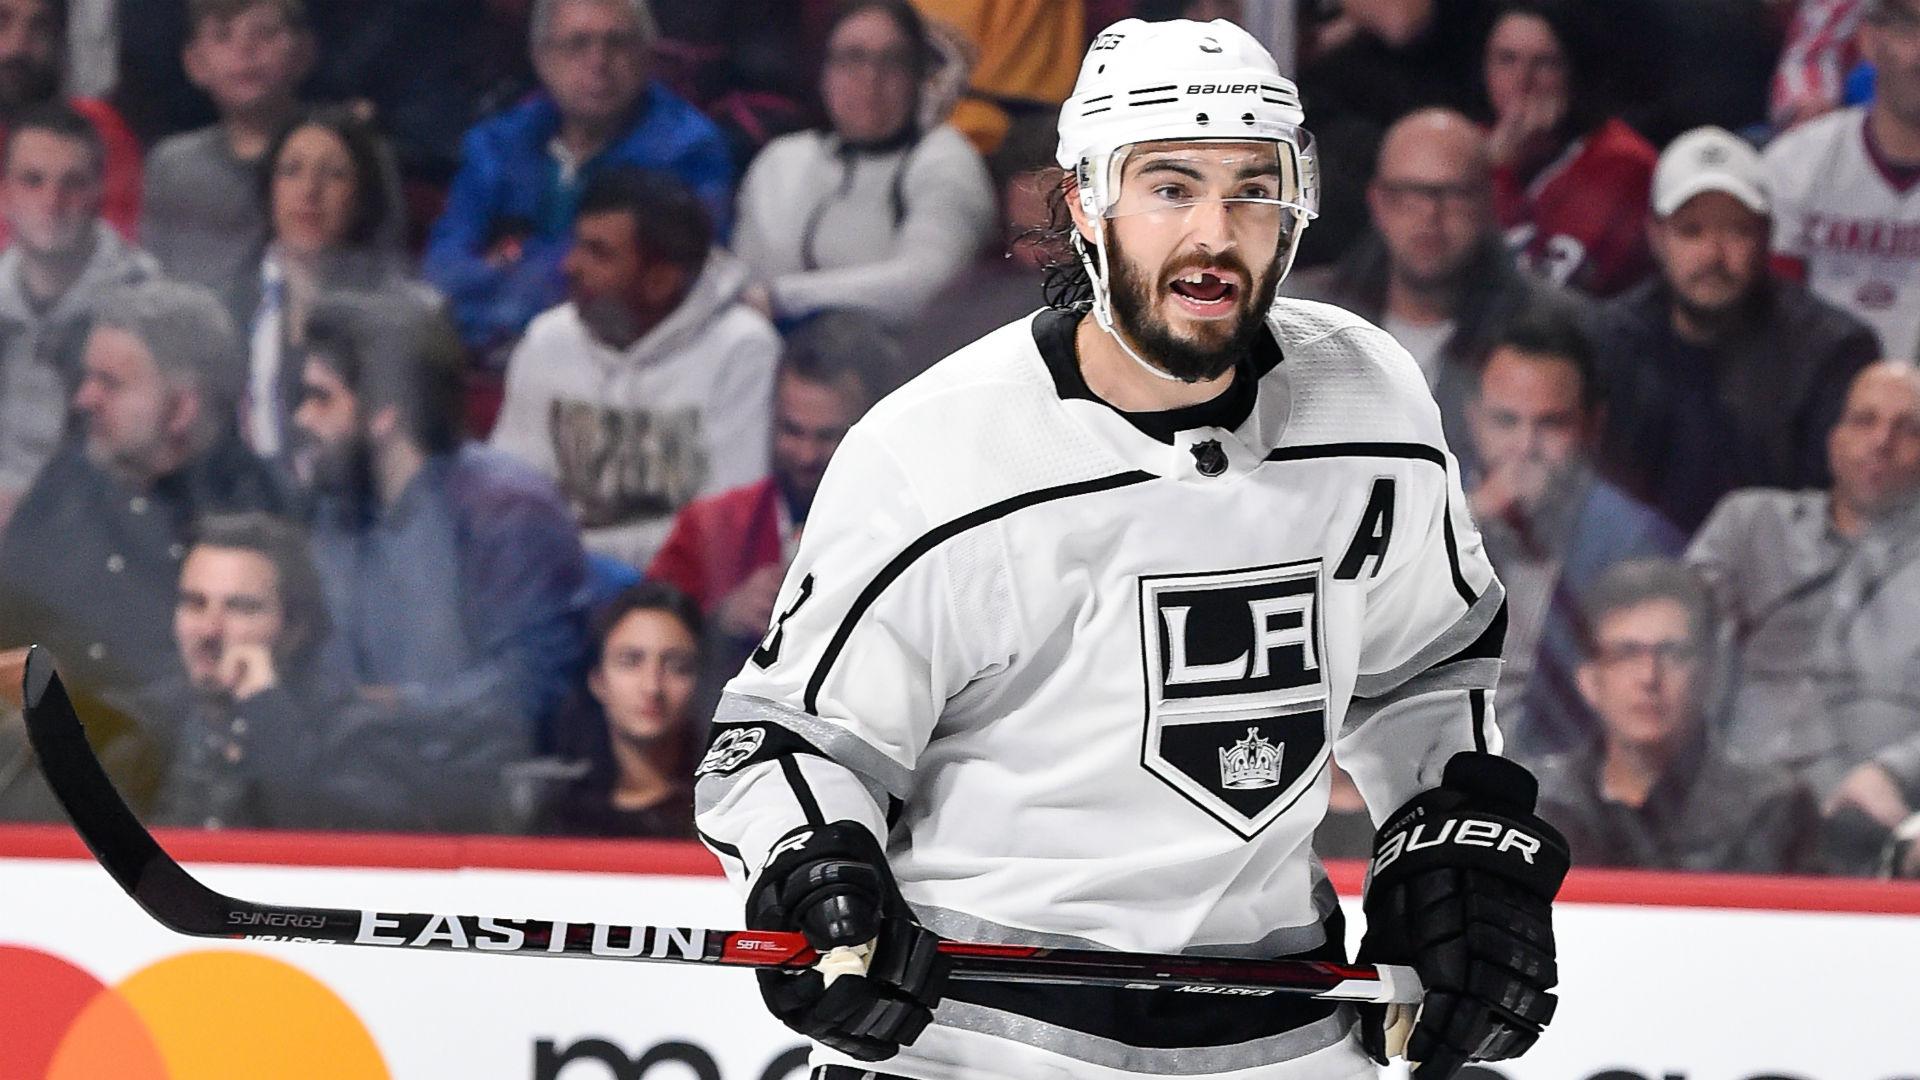 NHL Free Agency News: Kings, Drew Doughty Agree To 8 Year Extension